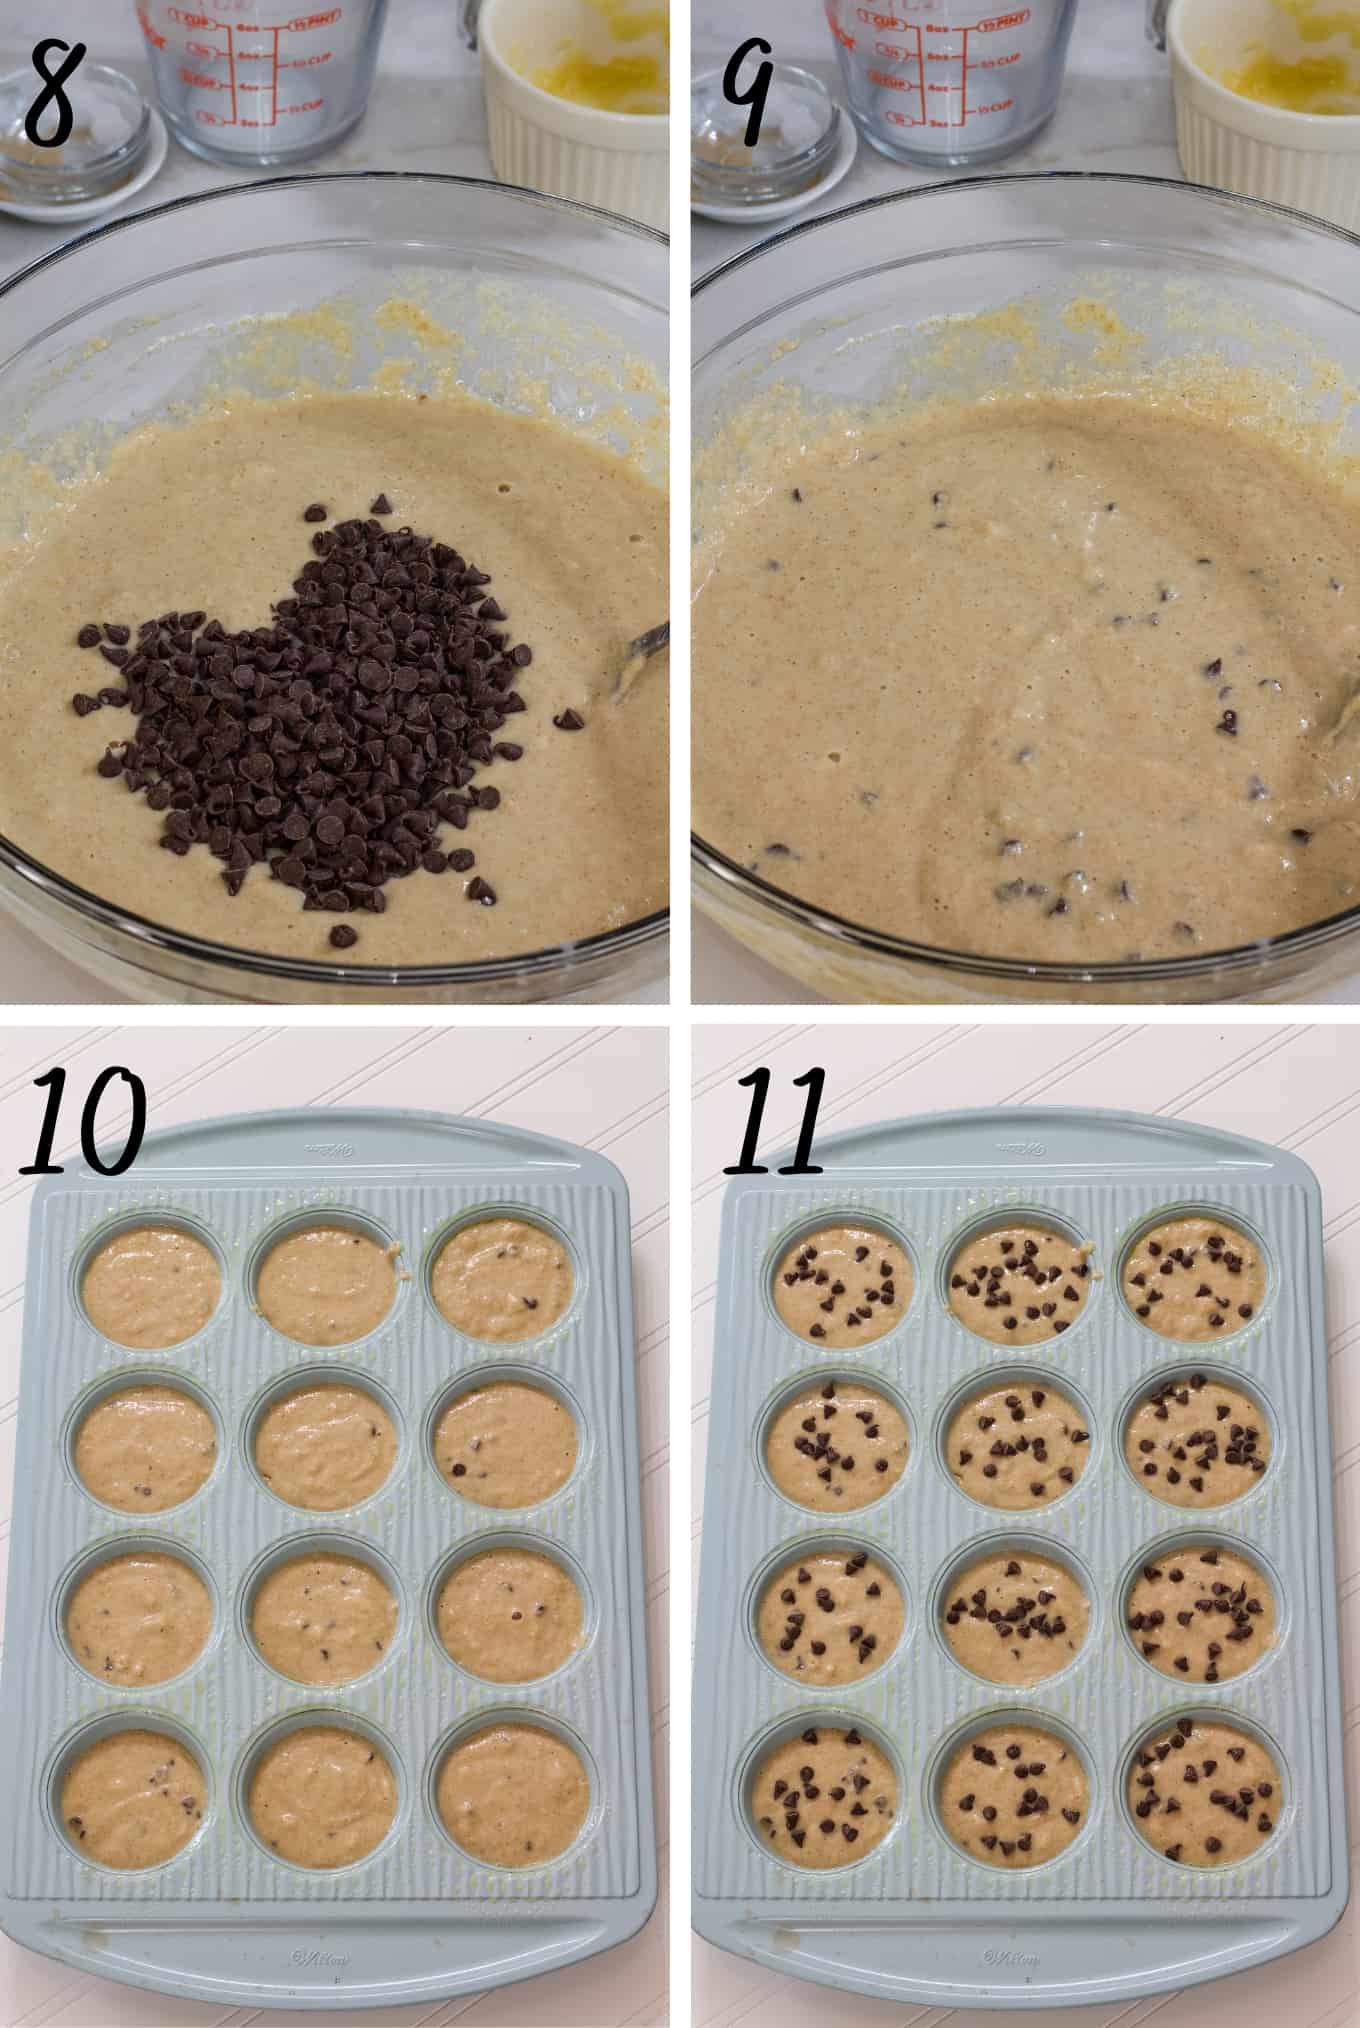 A collage of four images; the ingredients in the bowl and the with chocolate chips, not mixed and mixed. Then the muffin pan filled with batter with and without extra chocolate chips on the uncooked muffins.